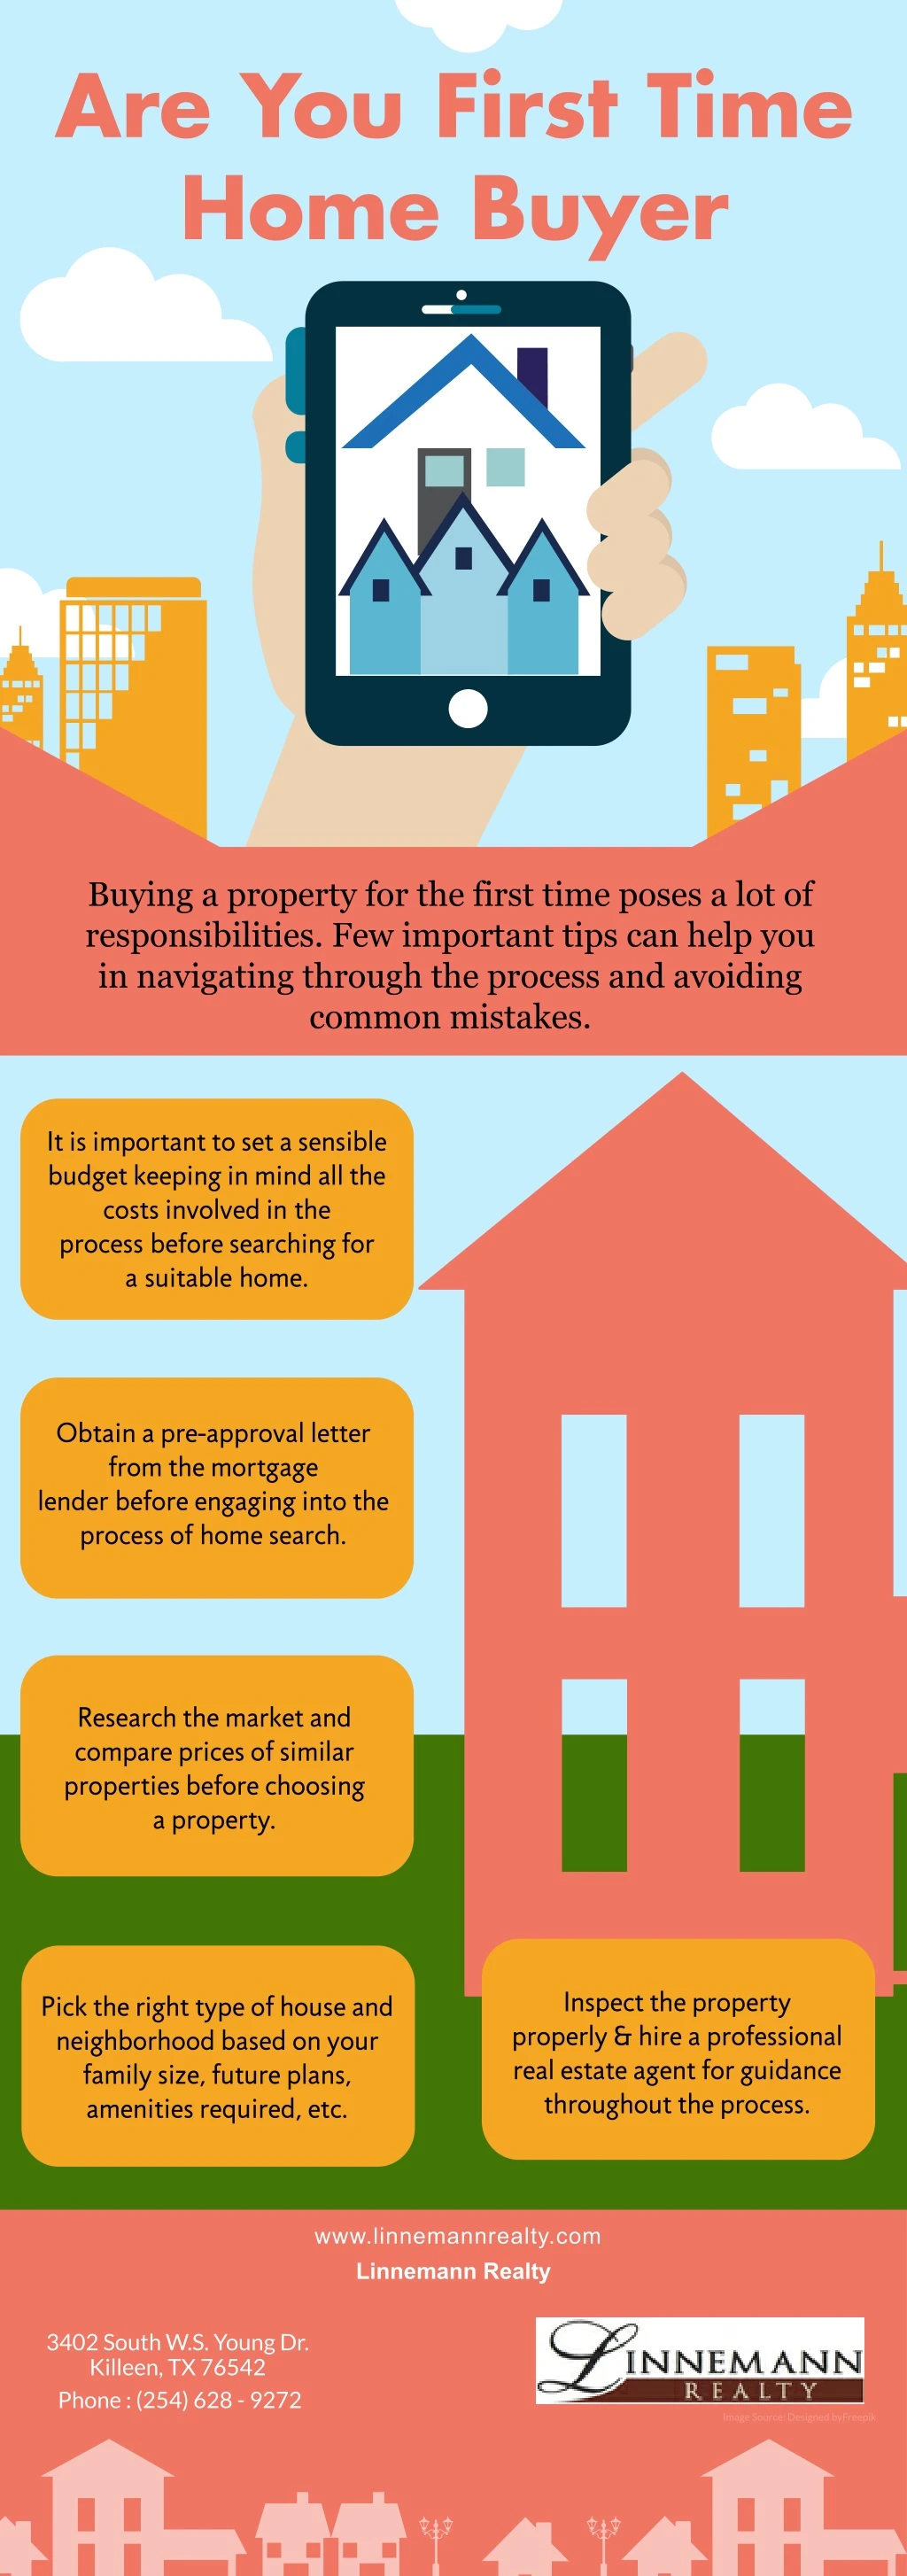 are you first time home buyer